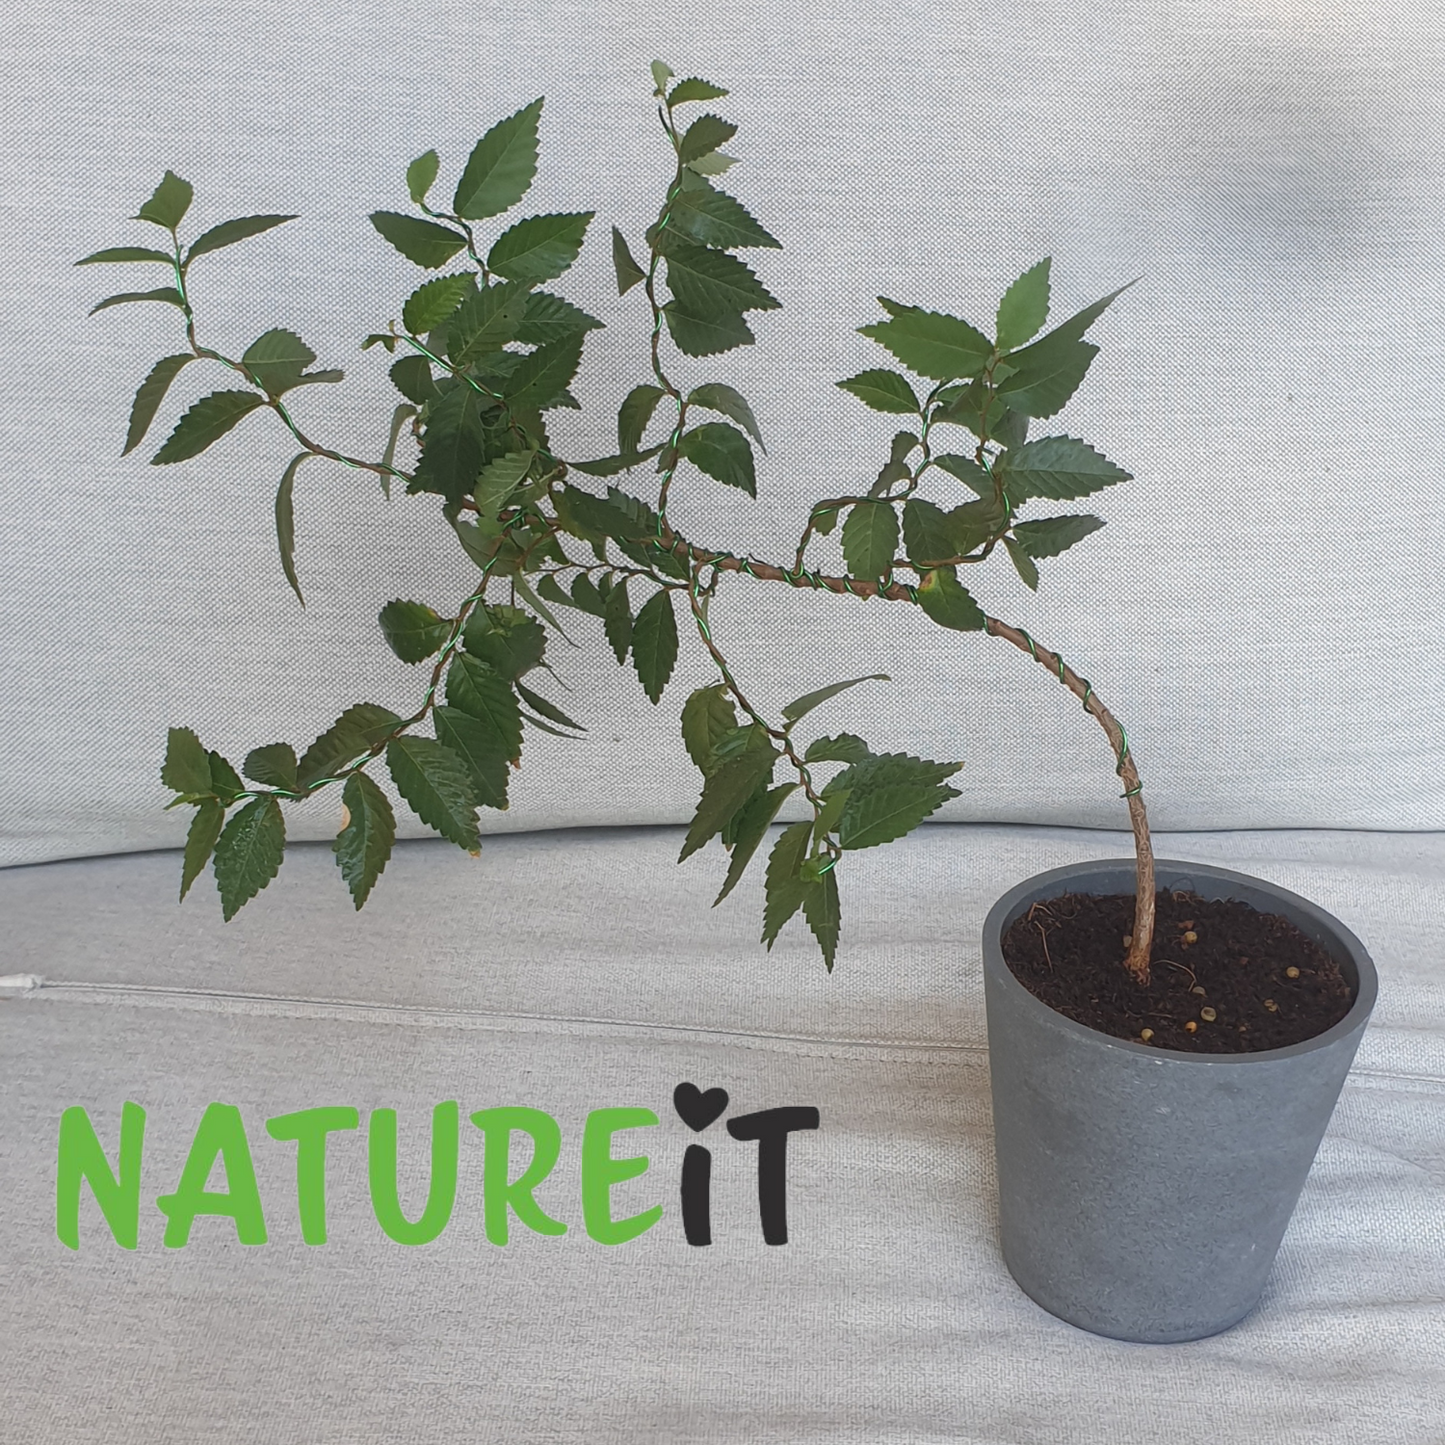 Wired and shaped Bonsai tree grown from seed and trained using natureit Bonsai tree seed starter kit and Garden and Bonsai tool set. 